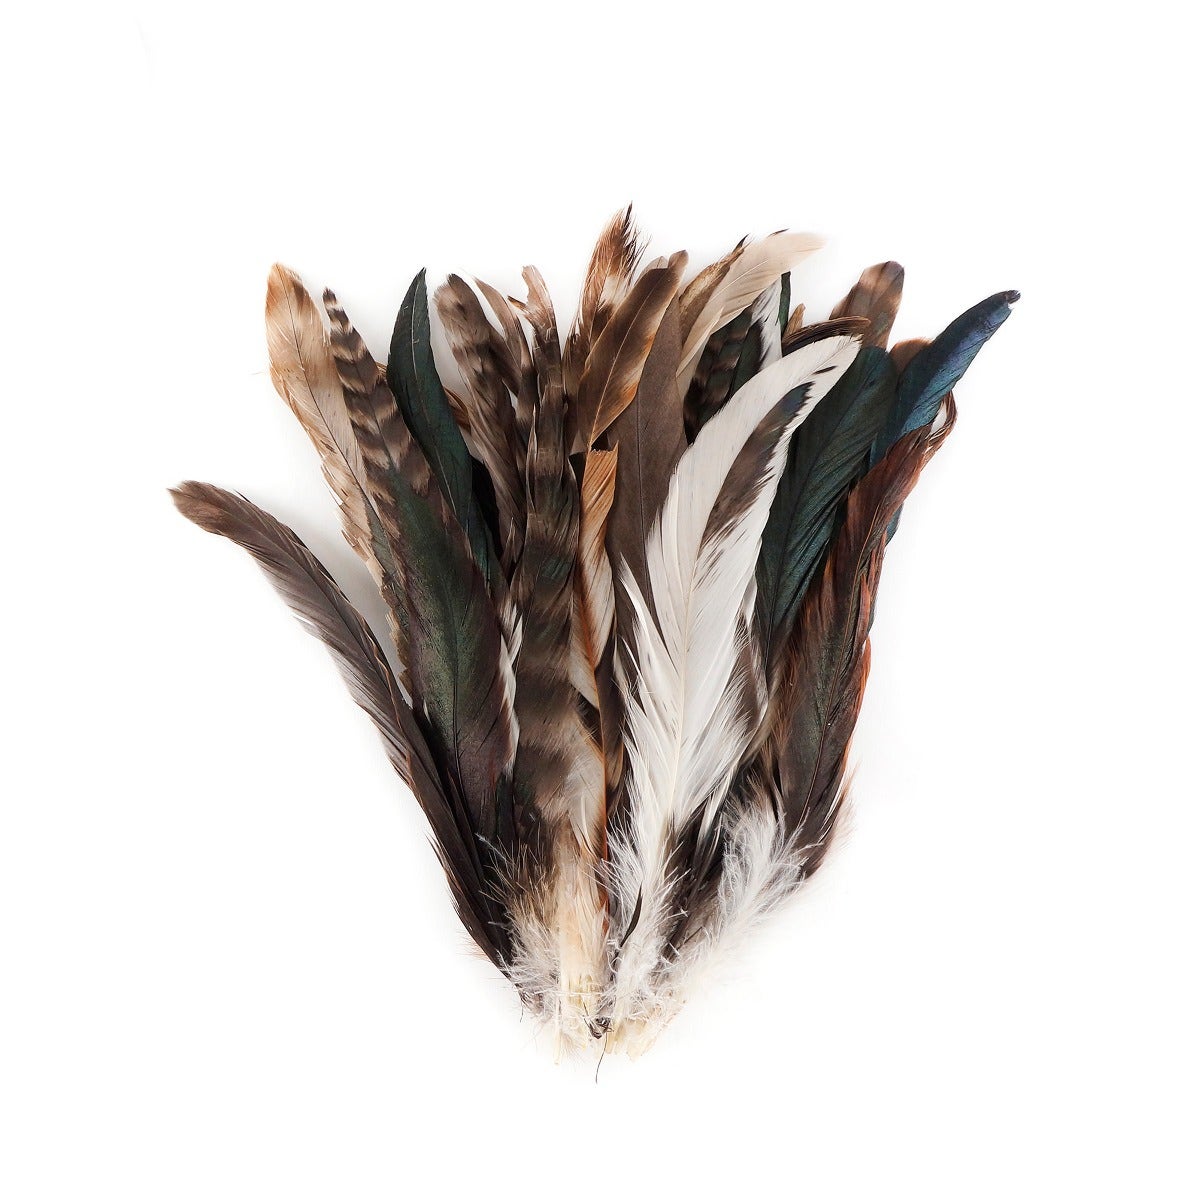 WHITE Rooster Tail Feathers 25 pack 9-12 long